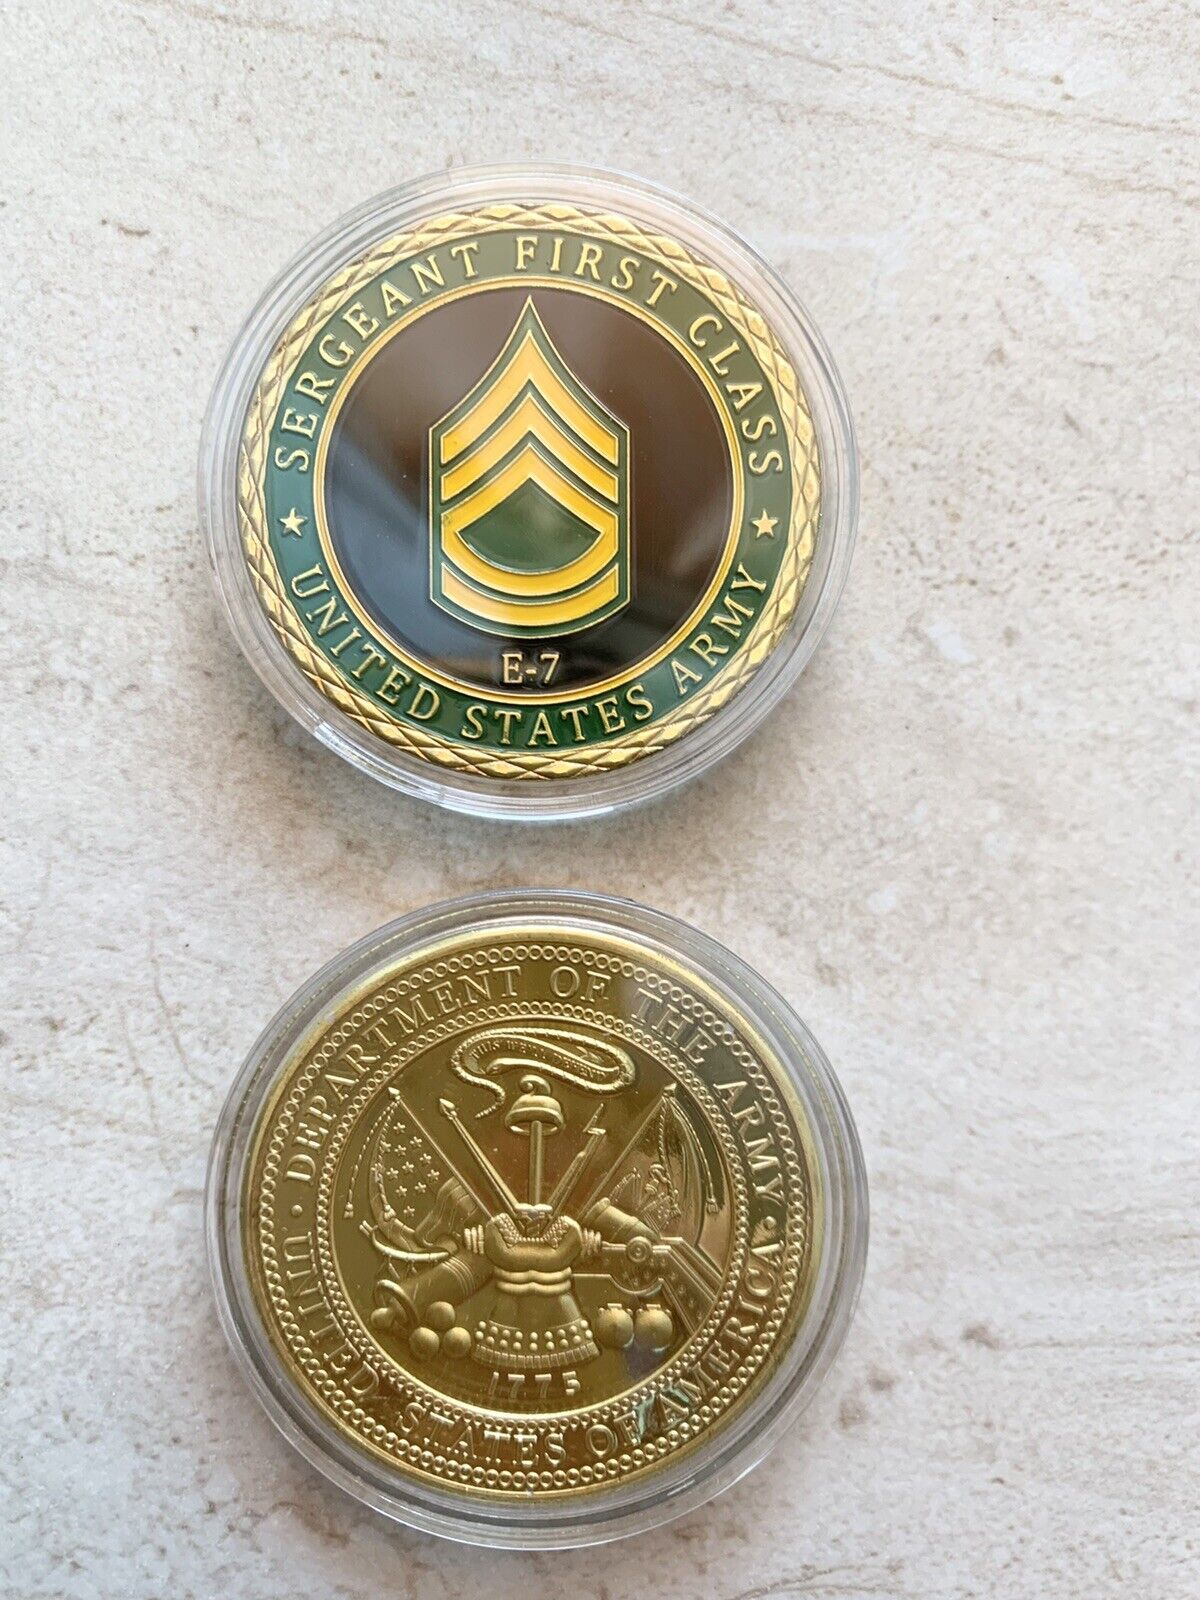 2 PCS CHALLENGE COIN UNITED STATES ARMY E-7 SFC SERGEANT FIRST CLASS